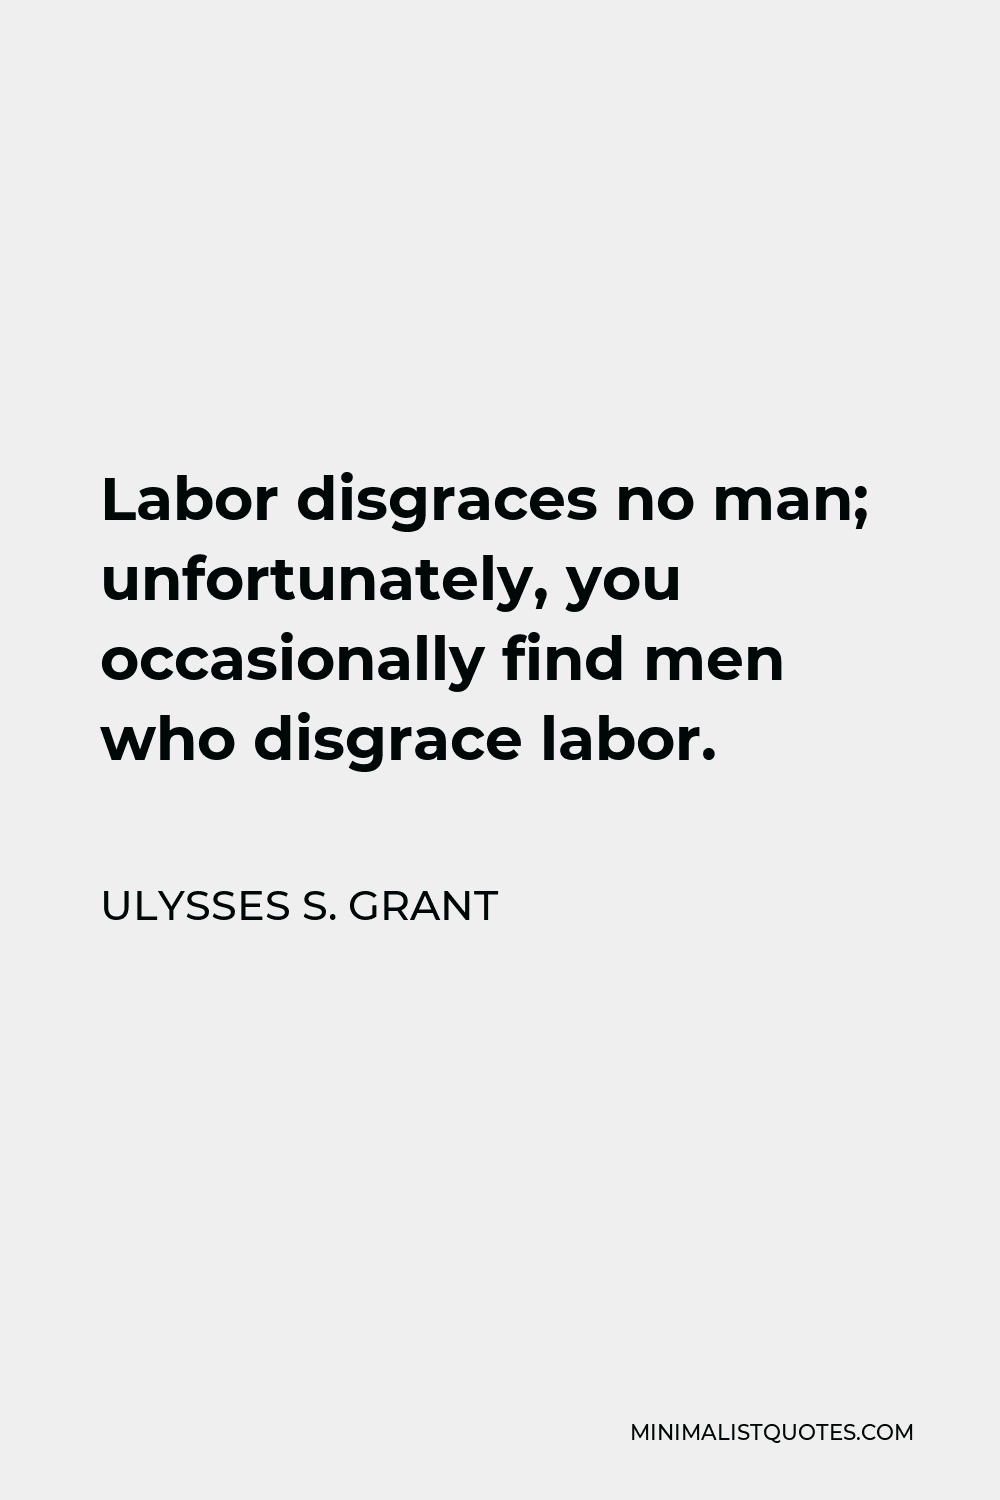 Ulysses S. Grant Quote - Labor disgraces no man; unfortunately, you occasionally find men who disgrace labor.